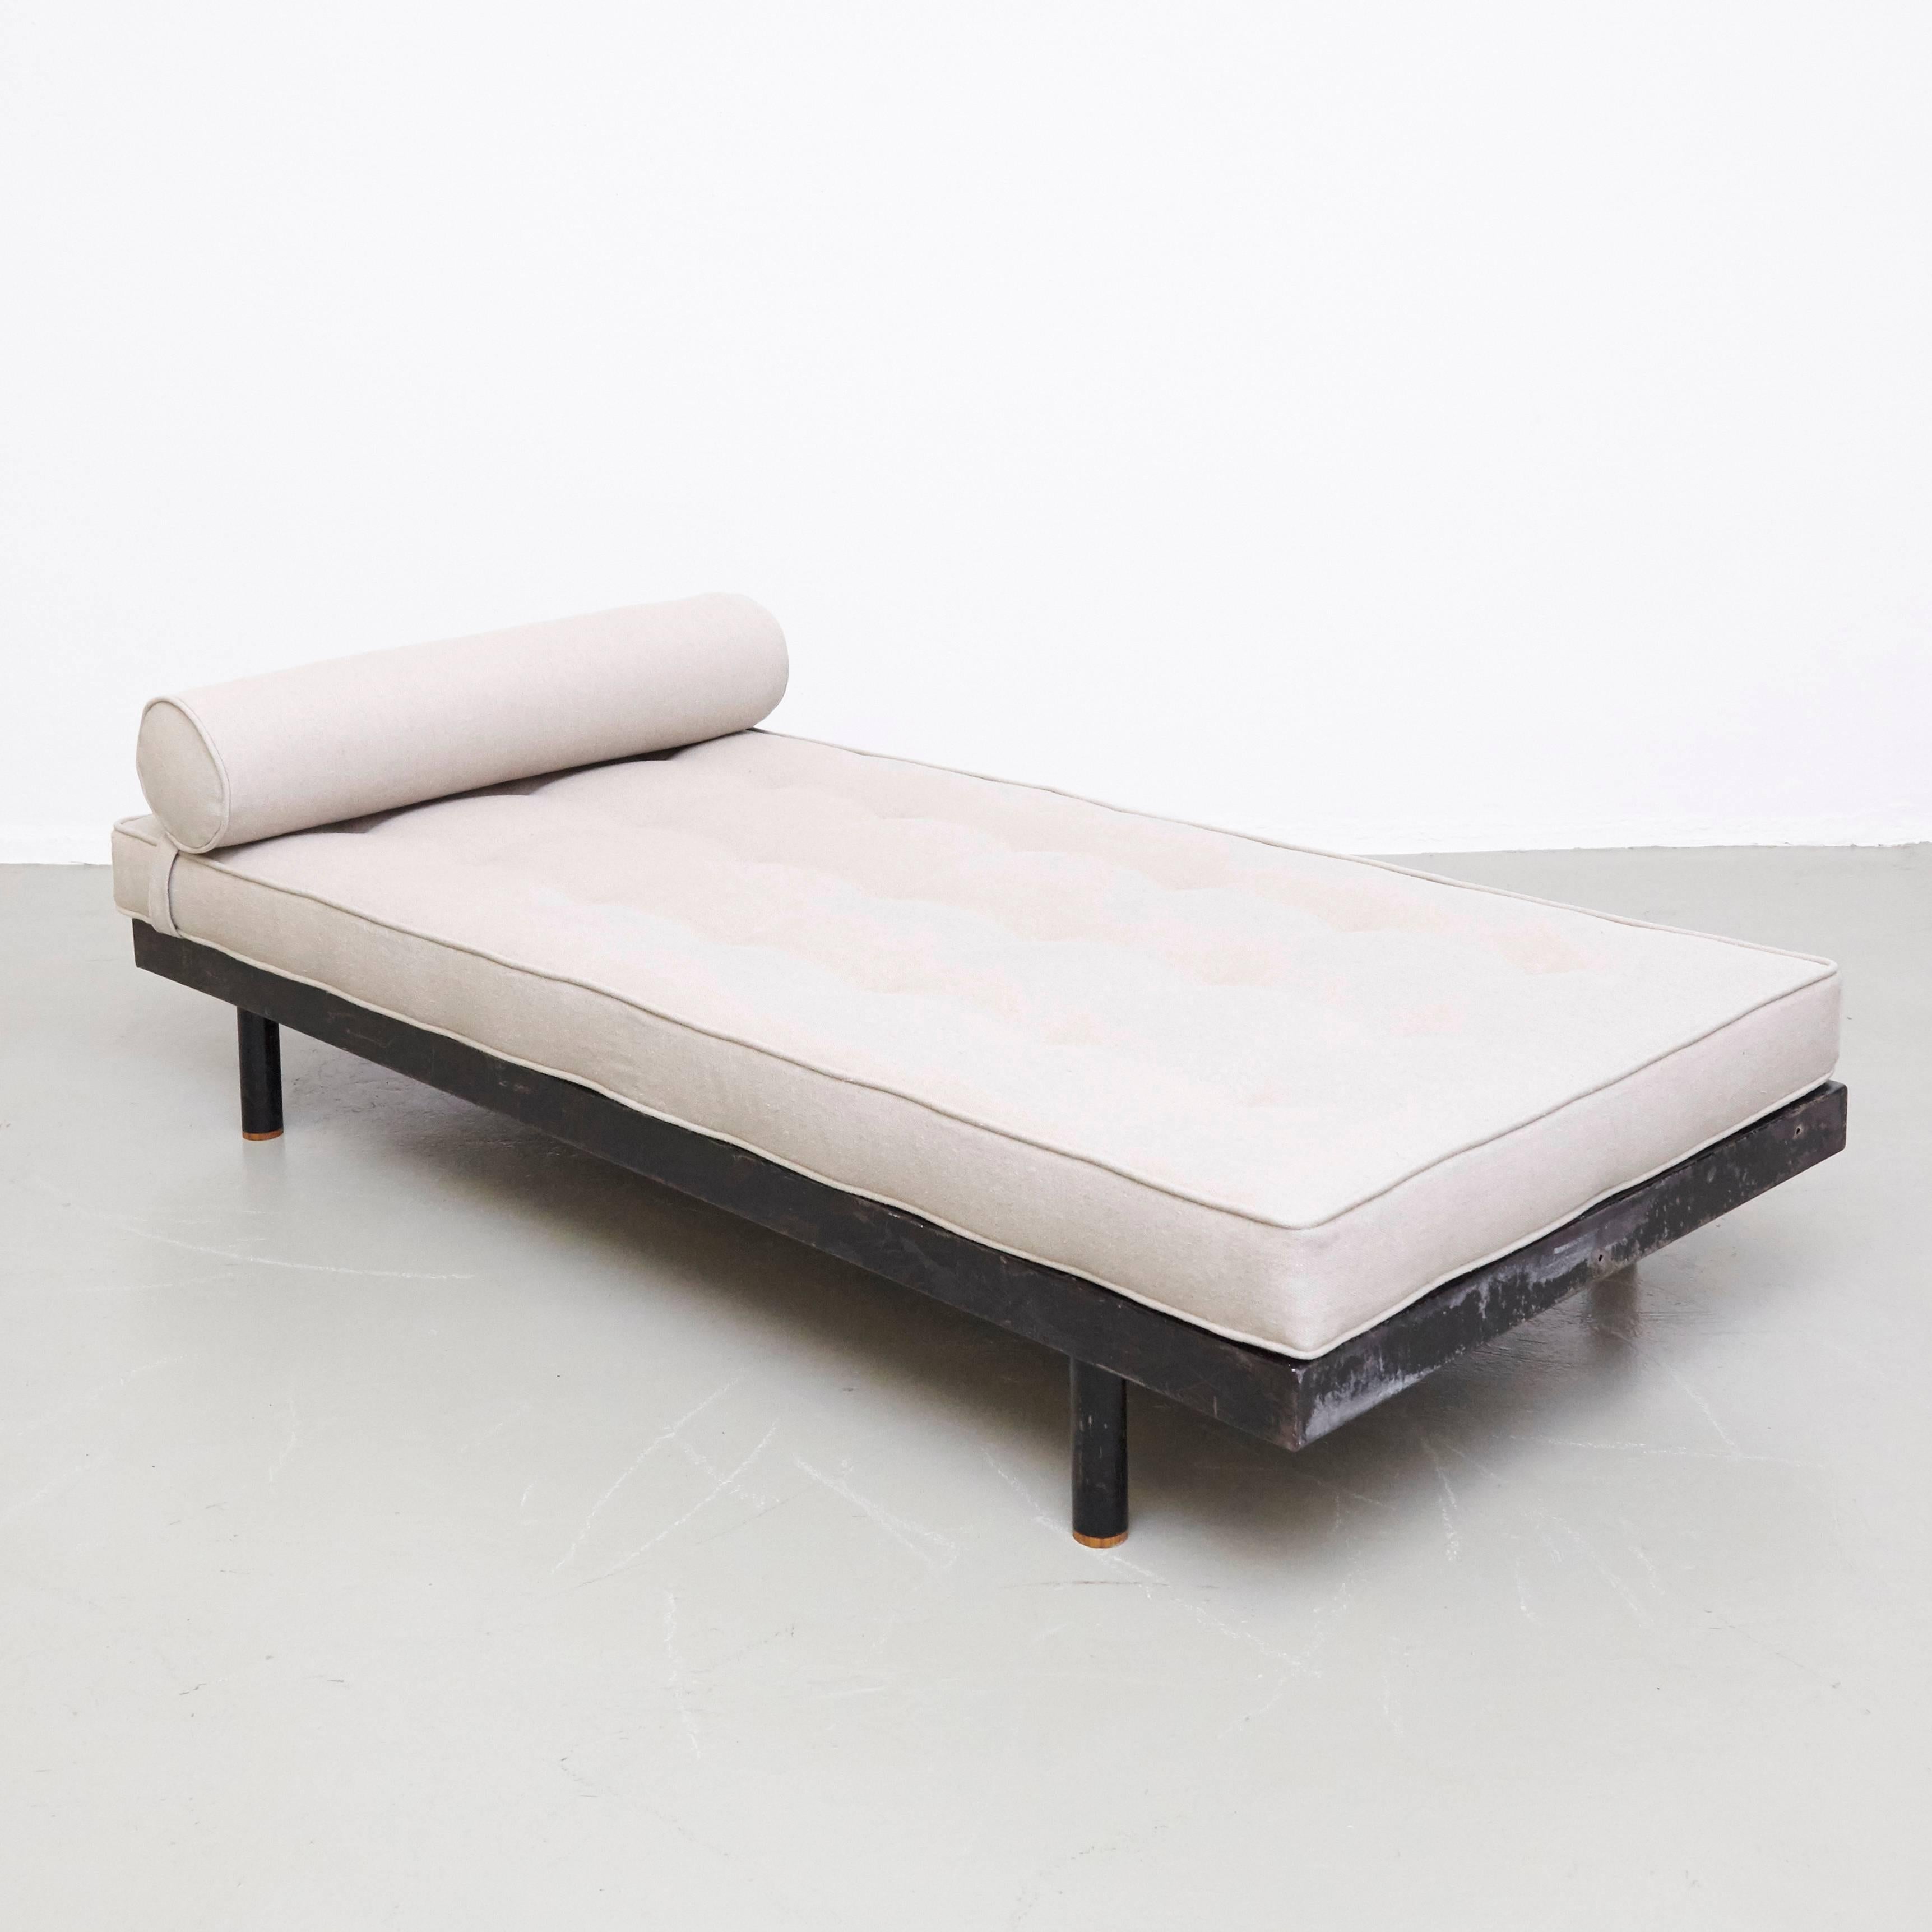 Jean Prouve Mid Century Modern Metal Upholstery SCAL French Daybed, circa 1950 (Moderne der Mitte des Jahrhunderts)